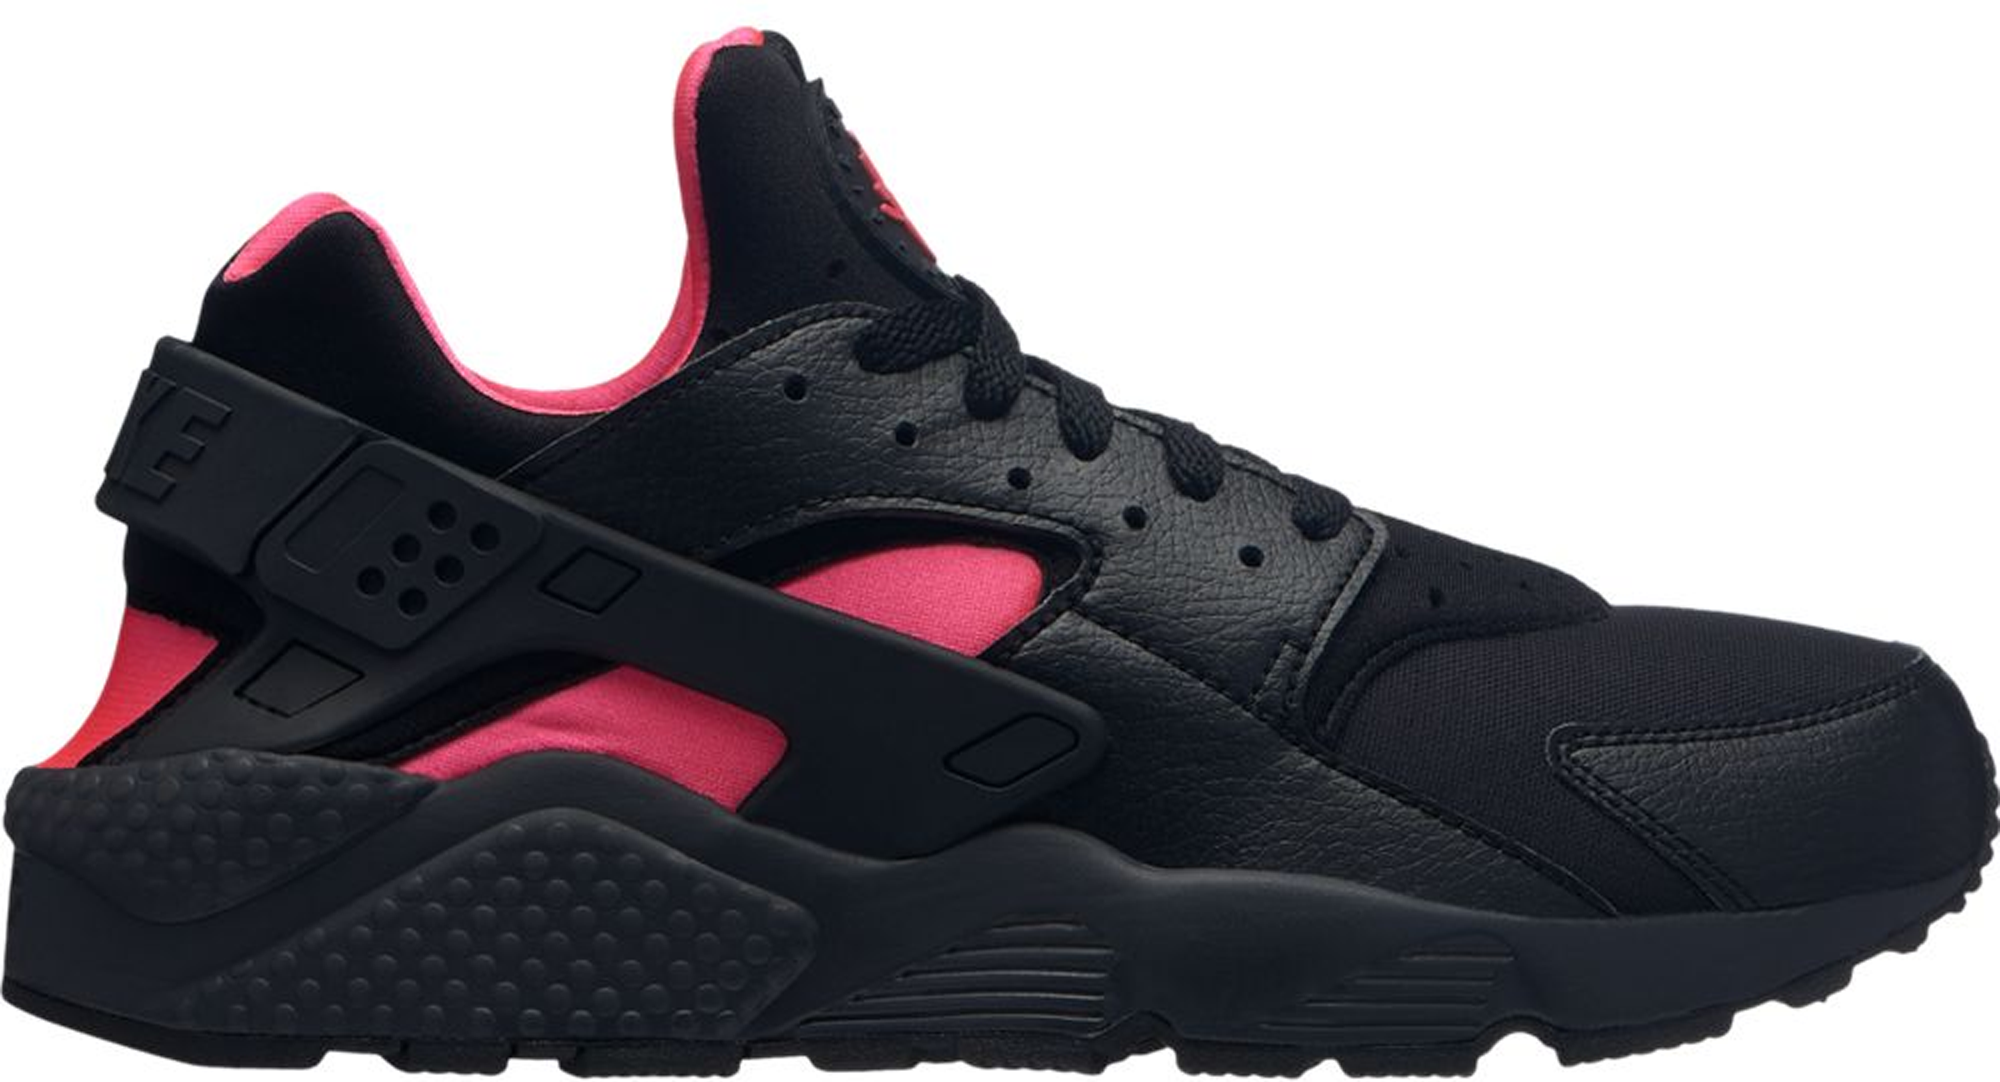 huaraches black red and green